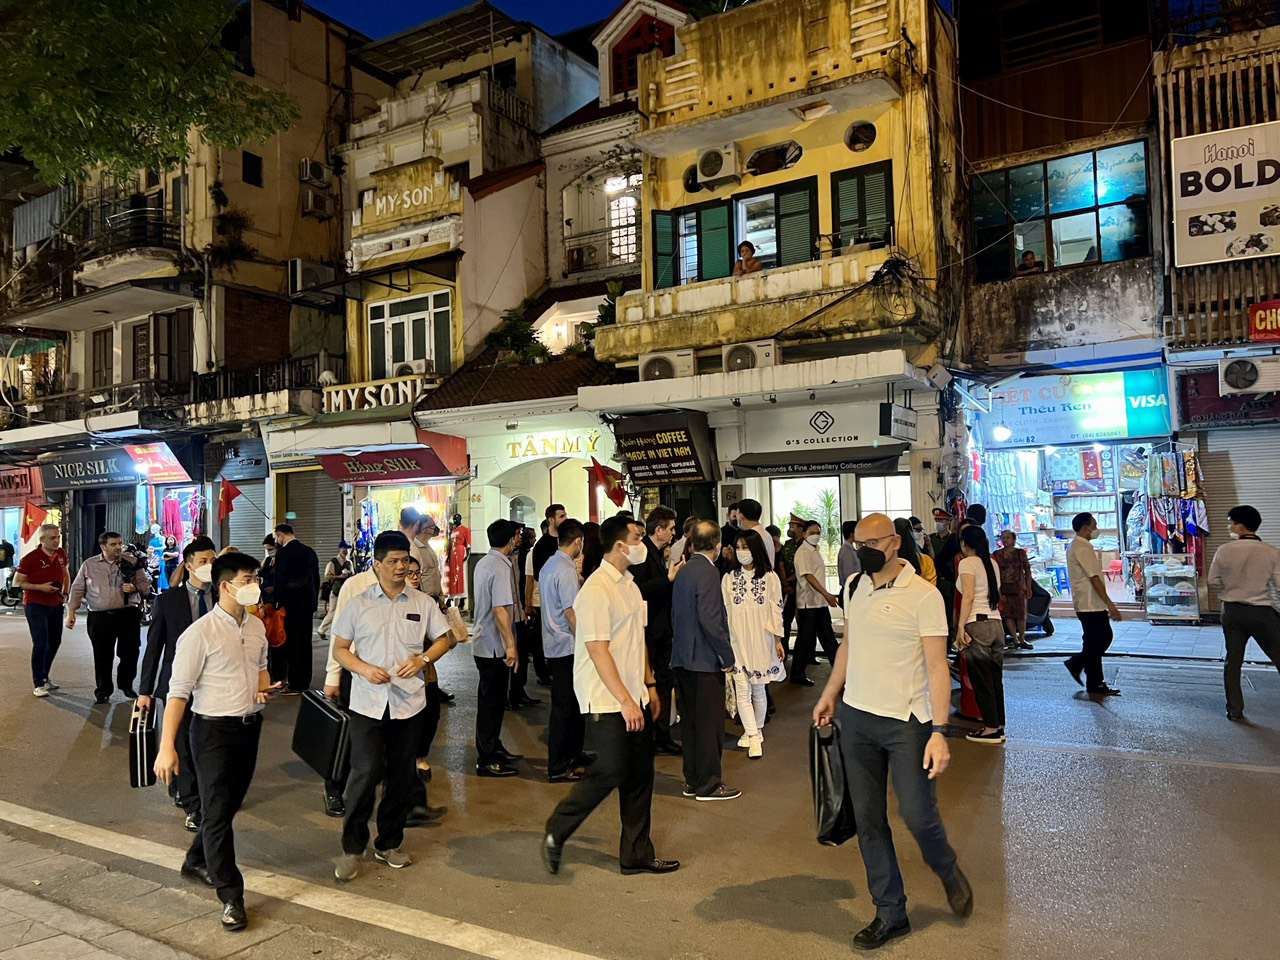 The delegation of Greek President Katerina Sakellaropoulou has a walk along Hang Gai Street in the Old Quarter in Hanoi, May 17, 2022. Photo: Hong Hanh / Tuoi Tre